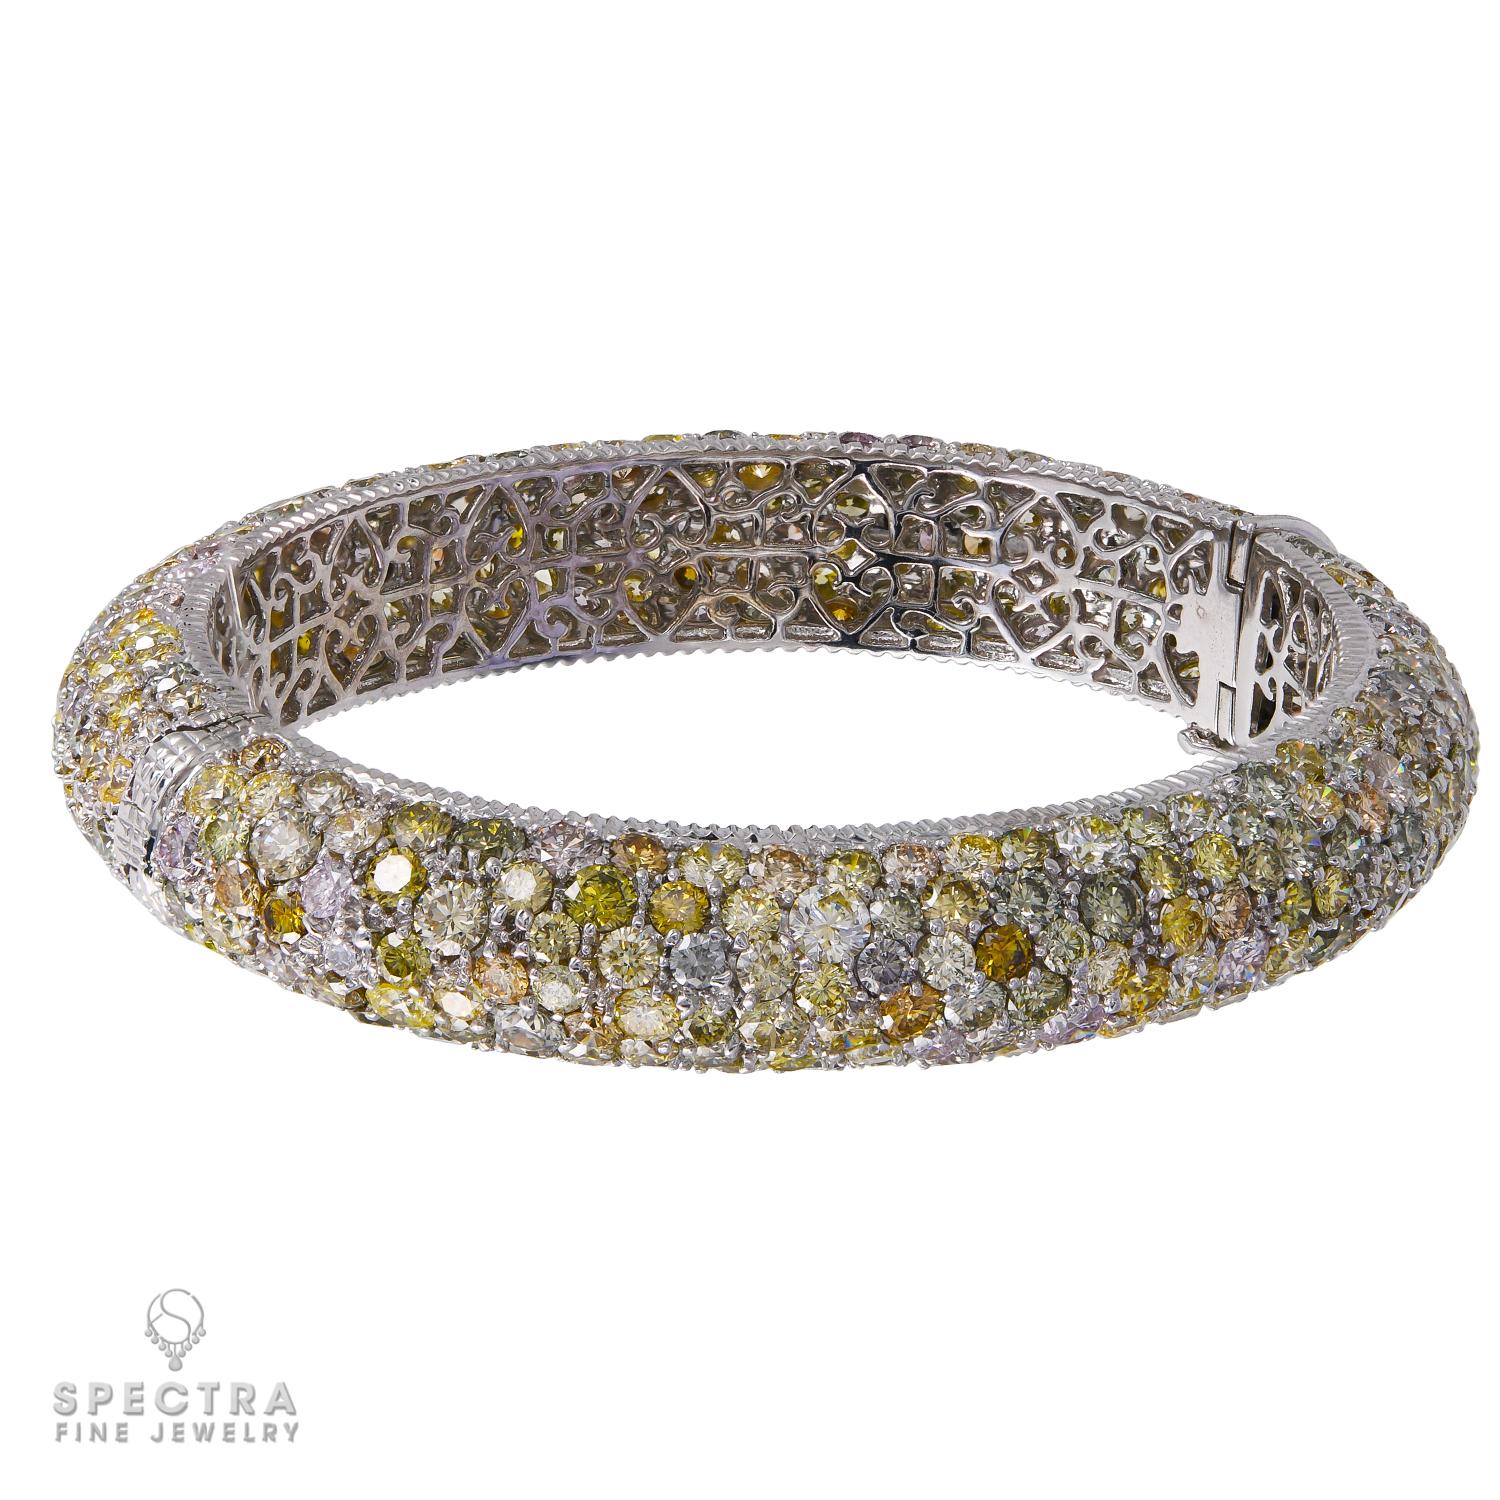 Multicolored diamonds can have an ethereal quality that is extremely delicate and light in a way that is too perfect for this world. This Contemporary Multicolor Diamond Pavé Bombé Bangle Bracelet, made by Spectra Fine Jewelry in 2021, is crafted in